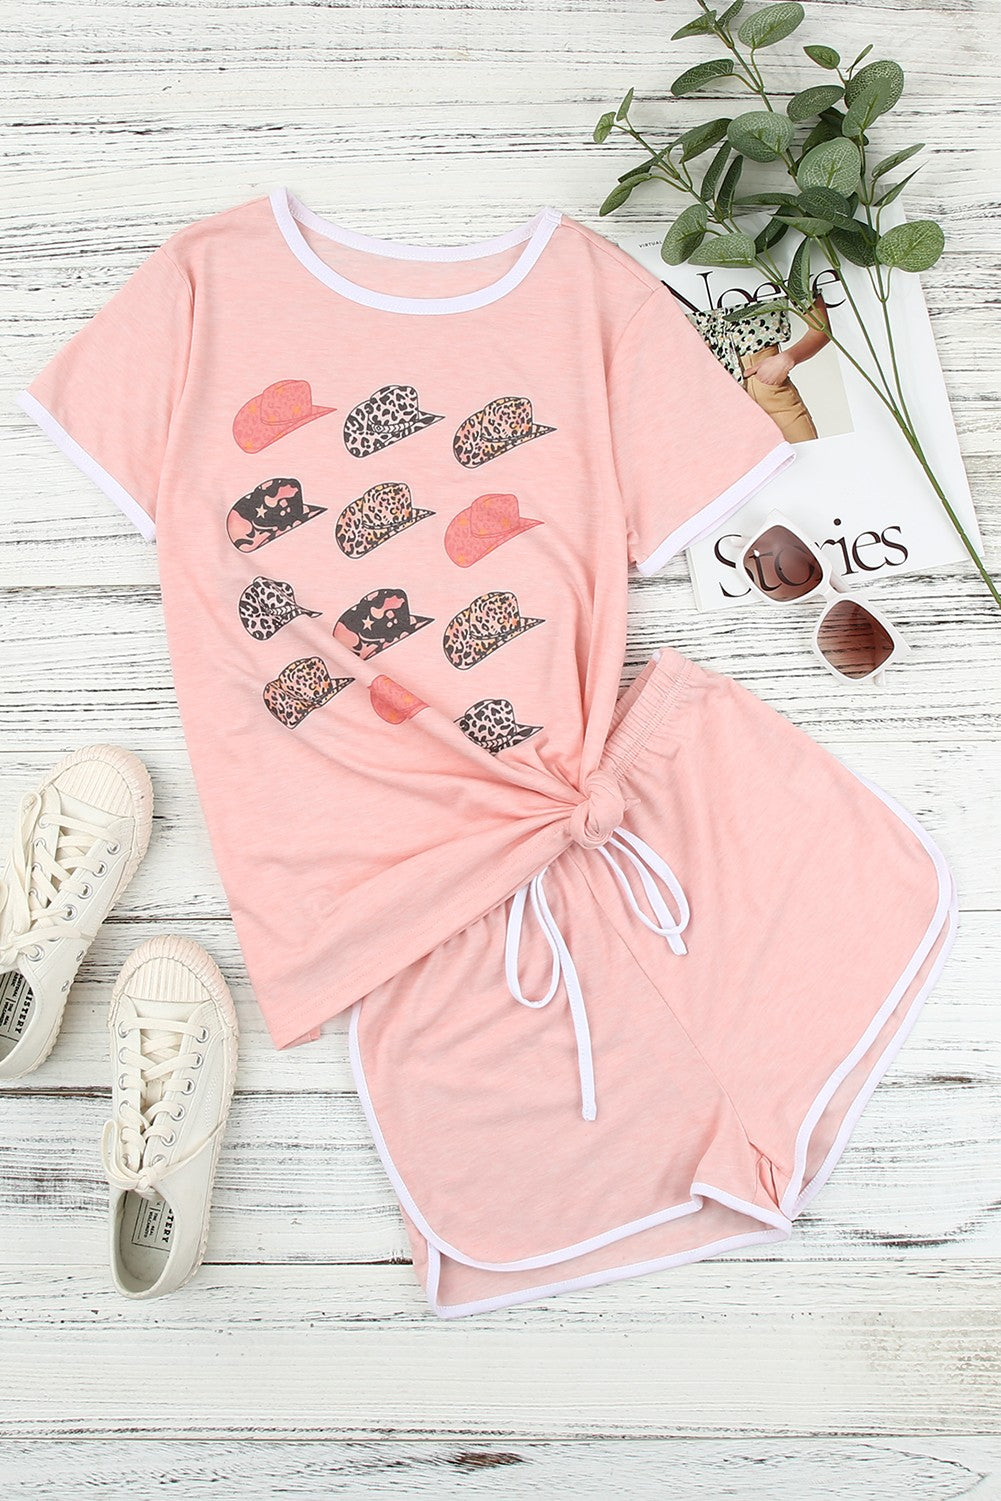 Graphic Tee and Drawstring Shorts Loungewear Set - Pink / S Apparel & Accessories Girl Code